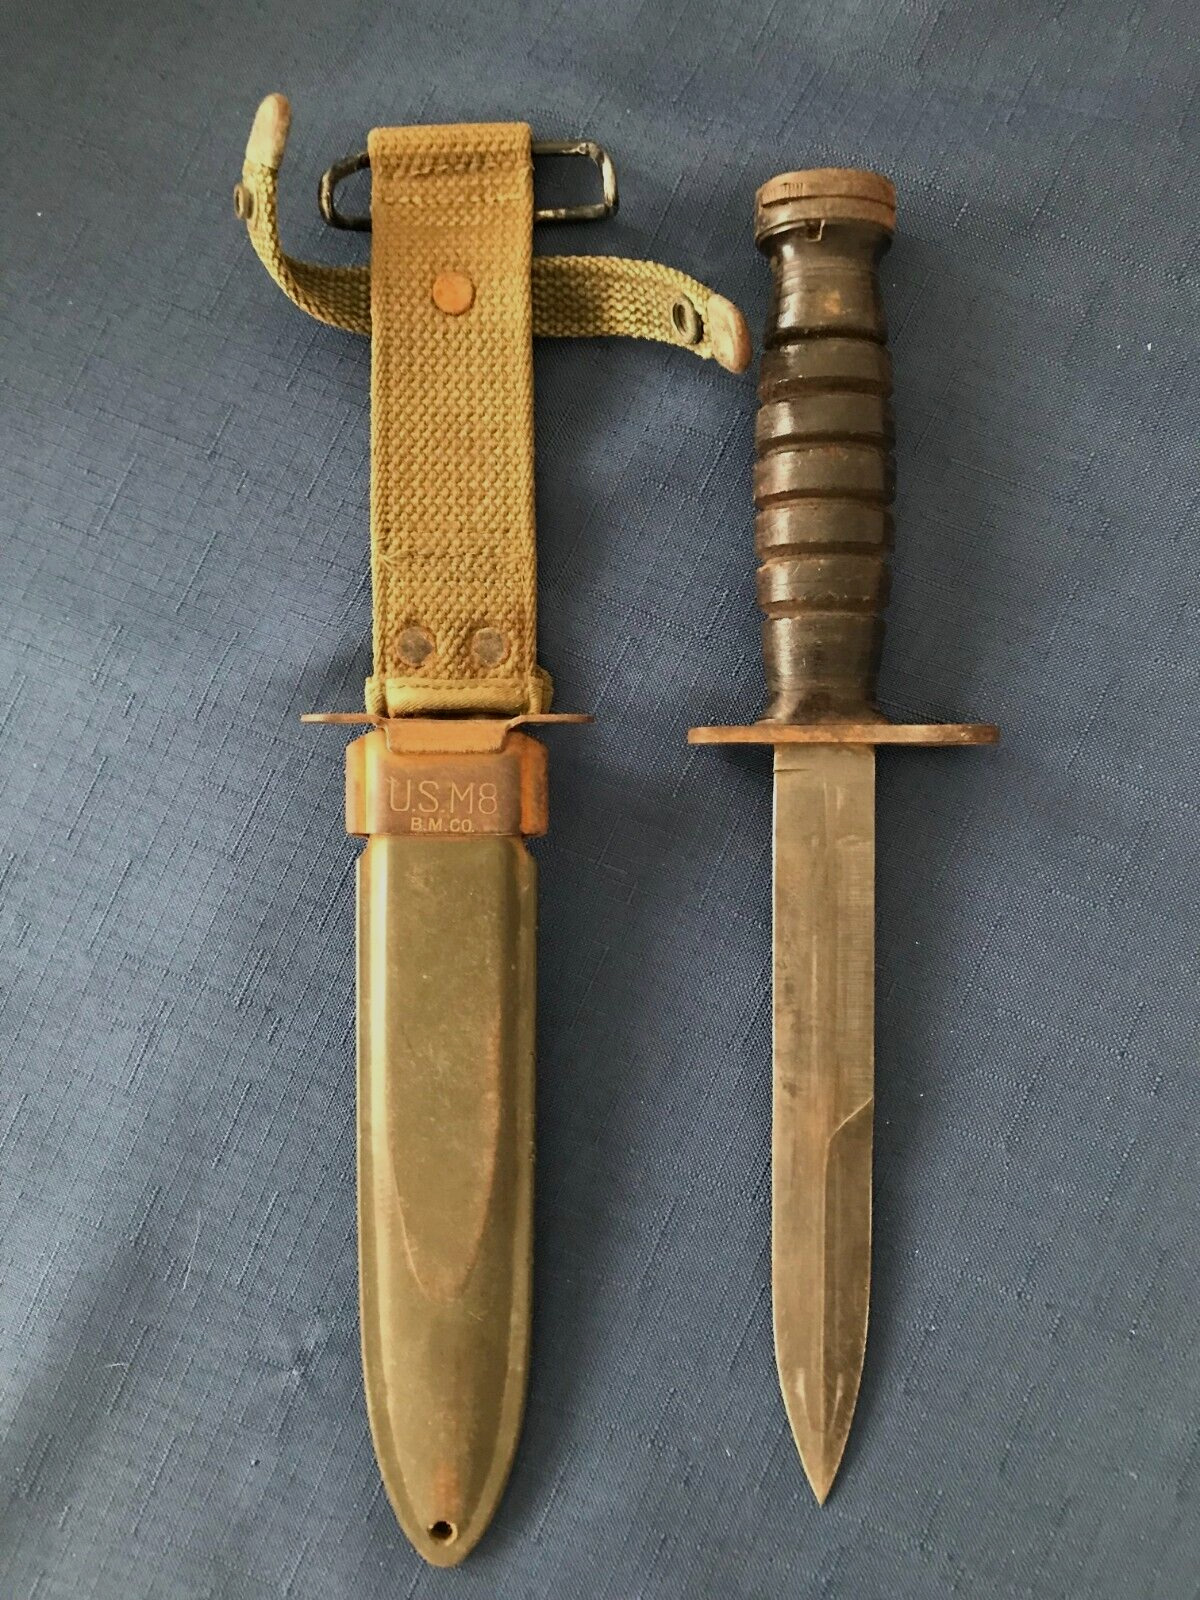 Original WWII Imperial USM4 Bayonet with Scabbard Marine Corp